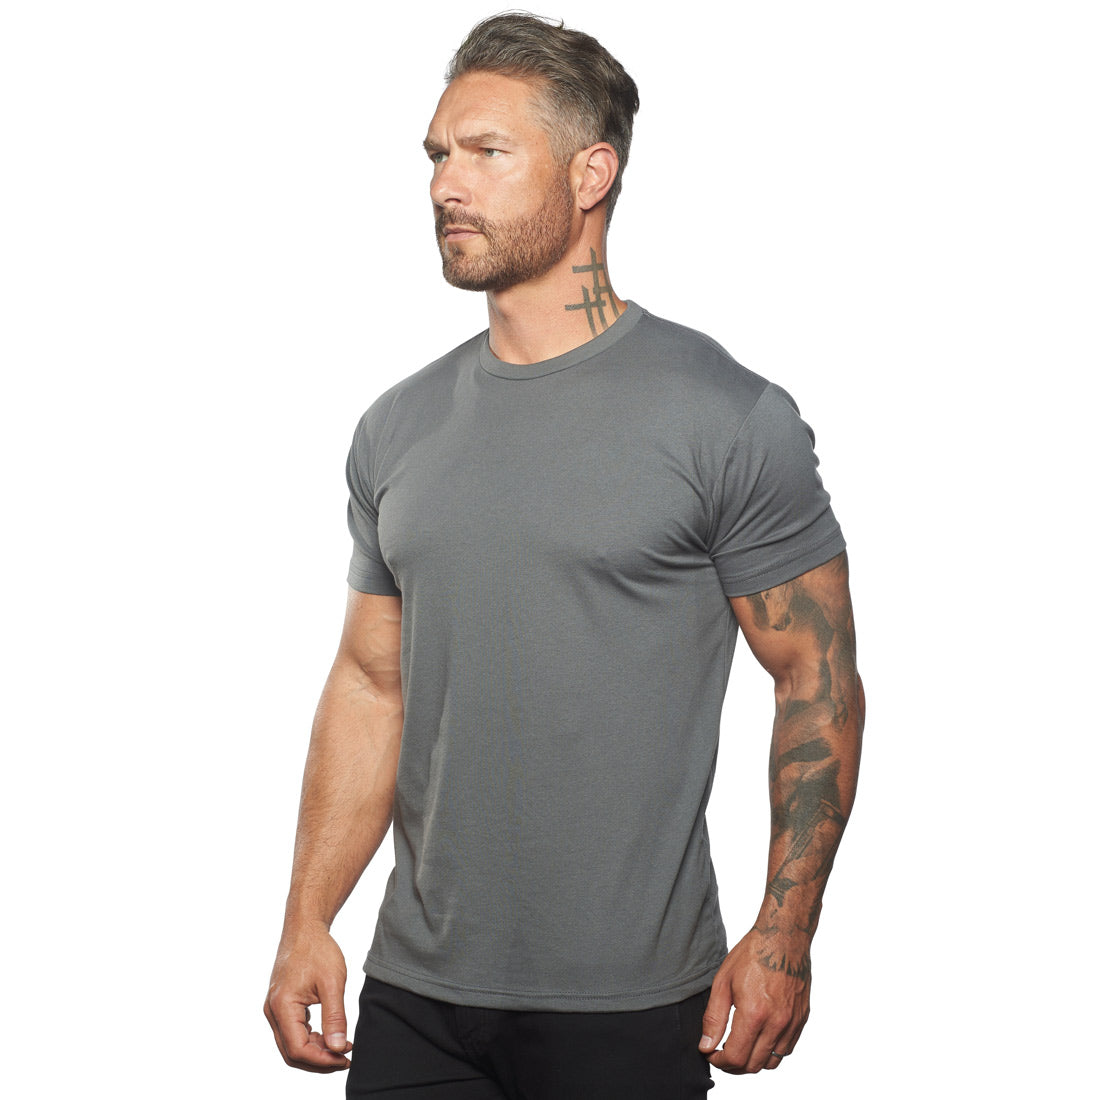 Buy The Latest Styles 45.00 usd for 5 STARS CENTRALL BLACK TEE